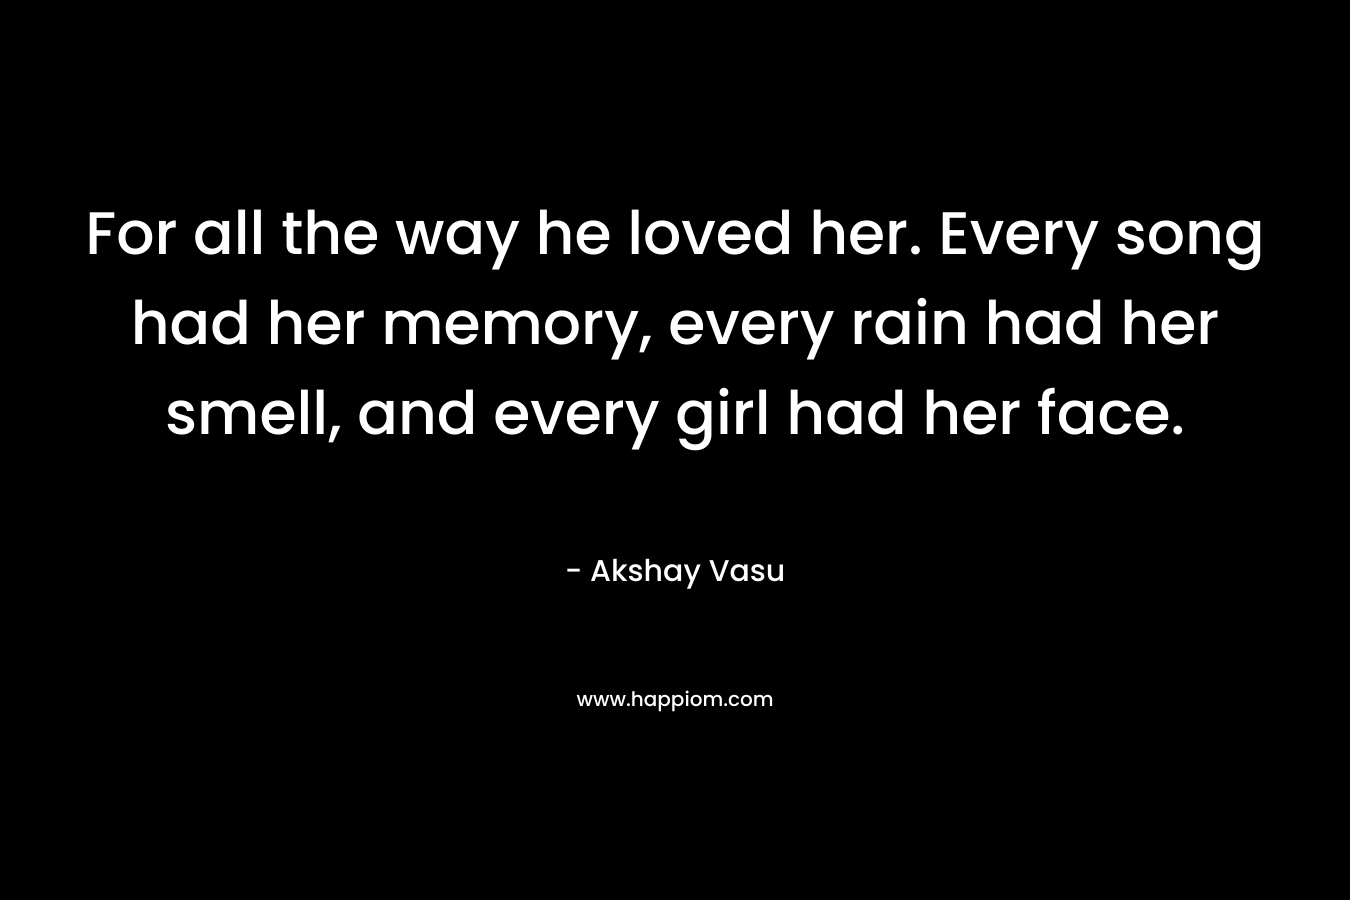 For all the way he loved her. Every song had her memory, every rain had her smell, and every girl had her face.